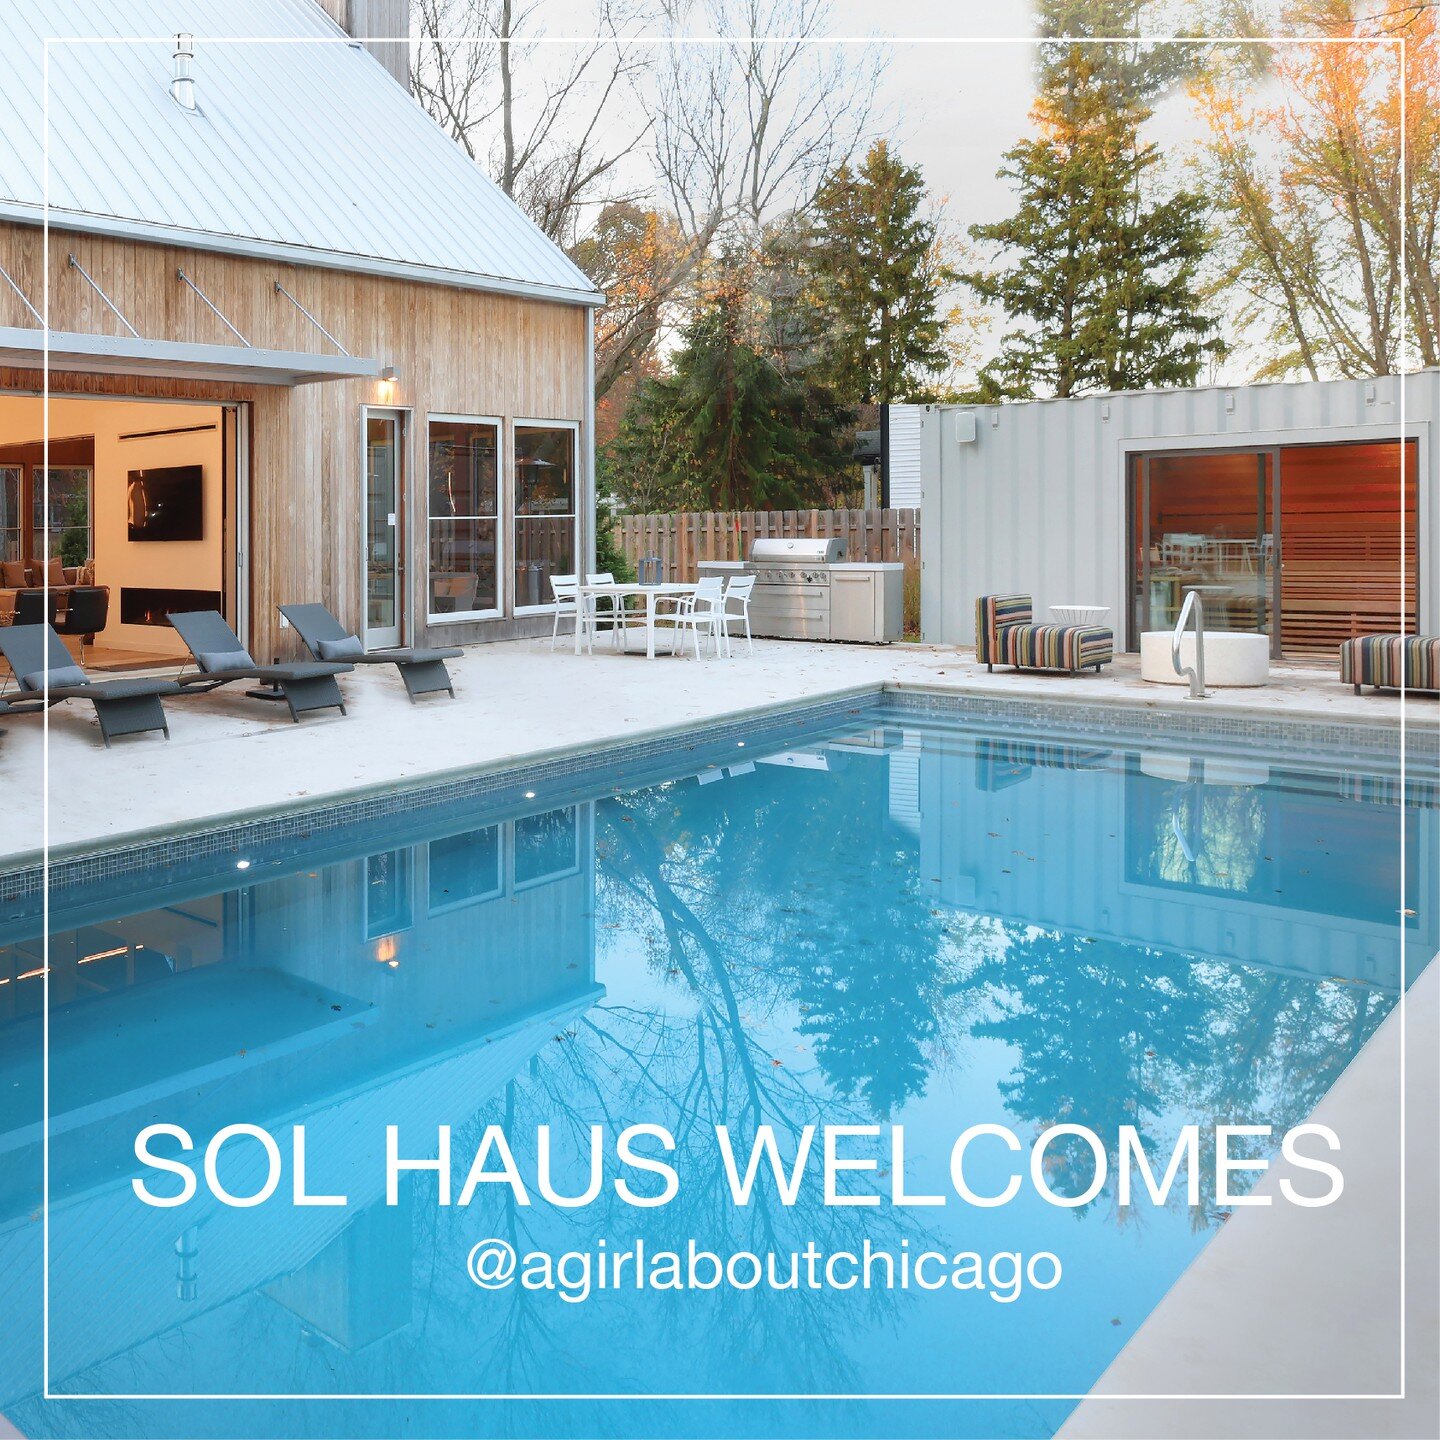 SOL HAUS welcomes @agirlaboutchicago this weekend! We hope you enjoy your stay. Pool Time! #agirlaboutchicago #solhausretreat #solhausmichigan #puremichigan #southwestmichigan #bluefishvacations #modernvacationhome #scandihome #sparetreat #poolhaus #